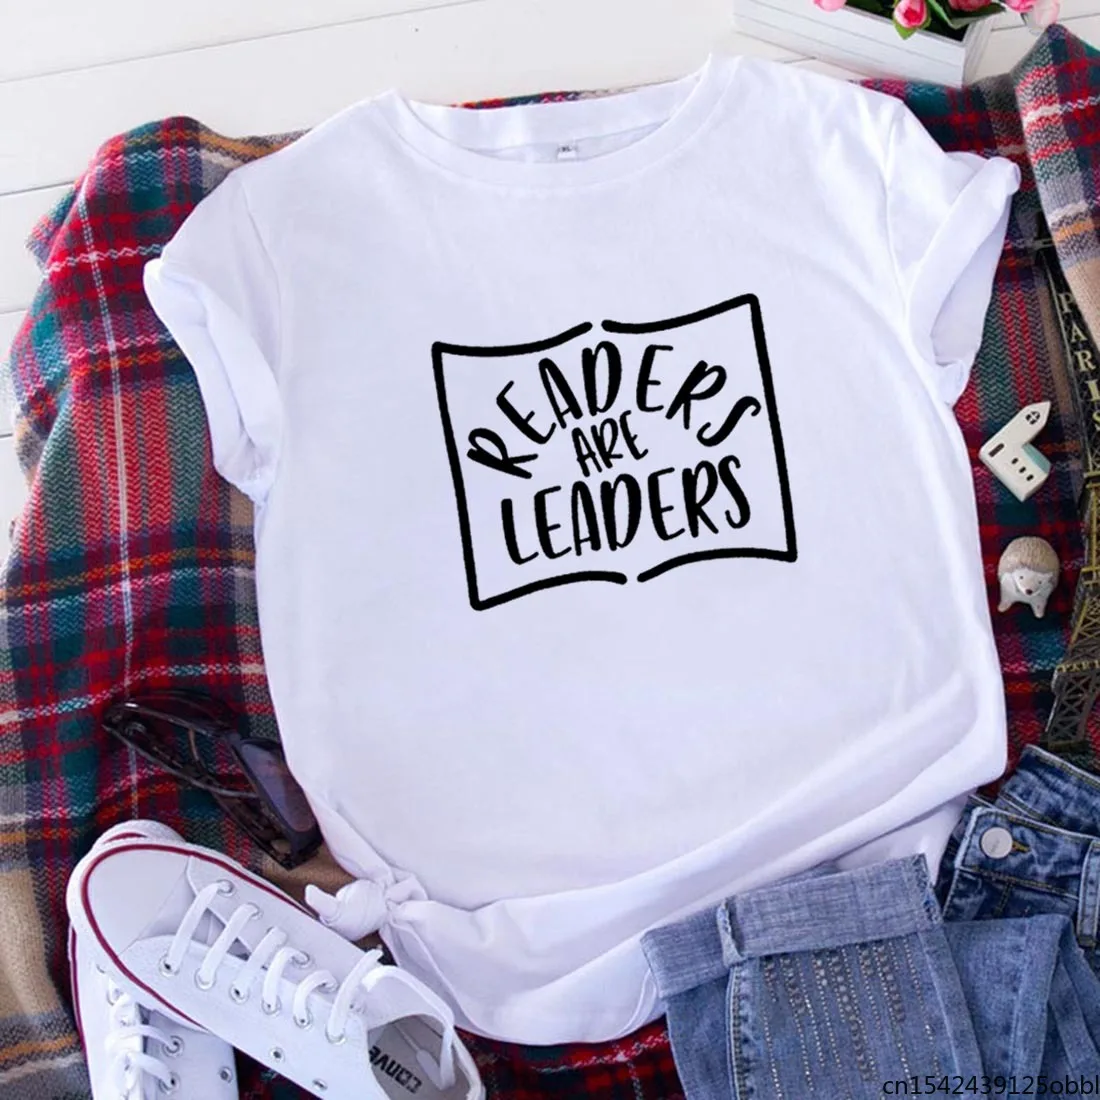 

Readers Are Leaders T Shirt Women Short Sleeve O-neck Loose Femme Black White Top